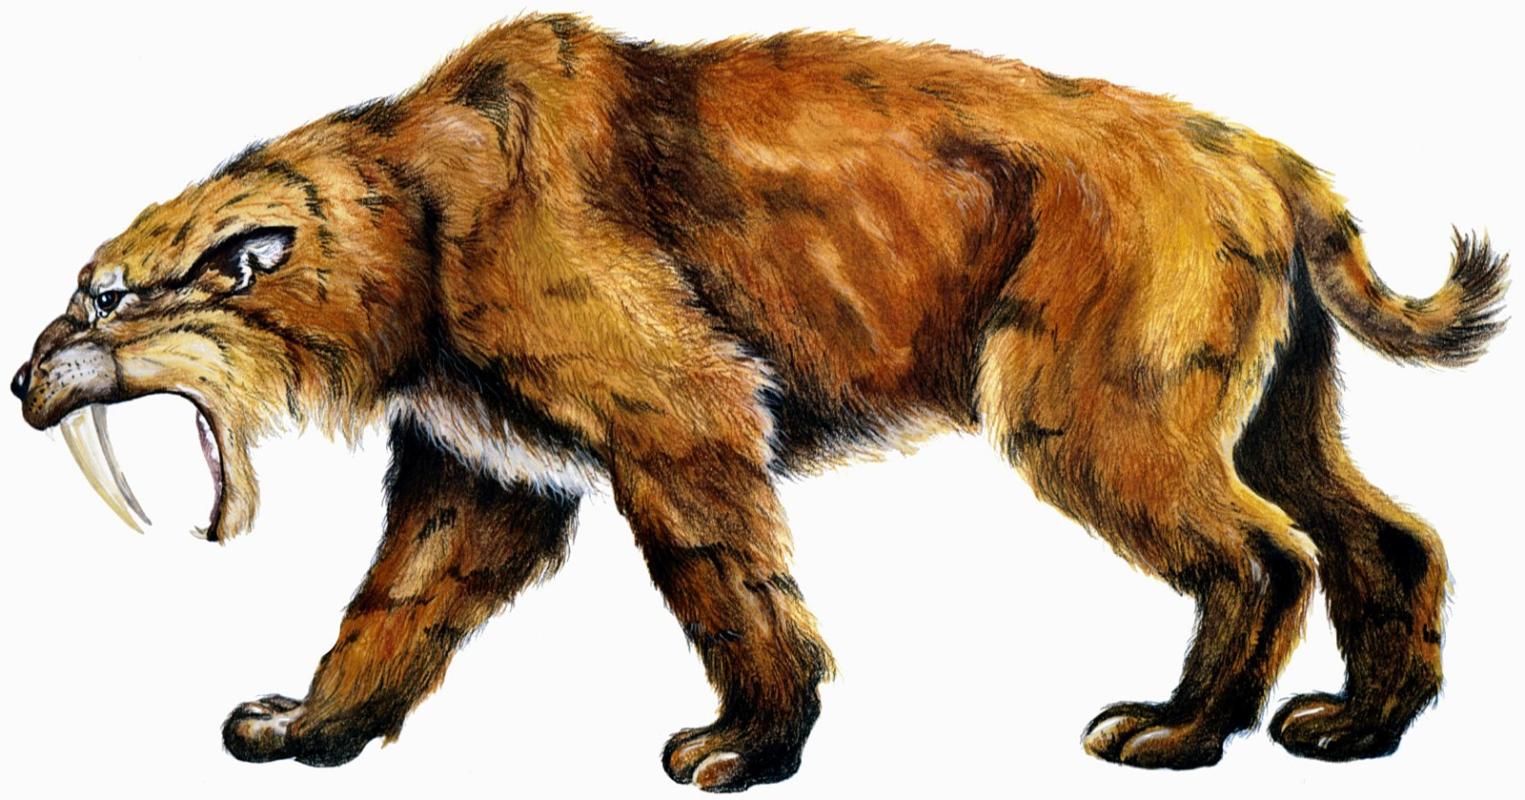 A Saber-toothed Tigers, known by the scientific term Smilodon. This animal, unrelated to modern cats